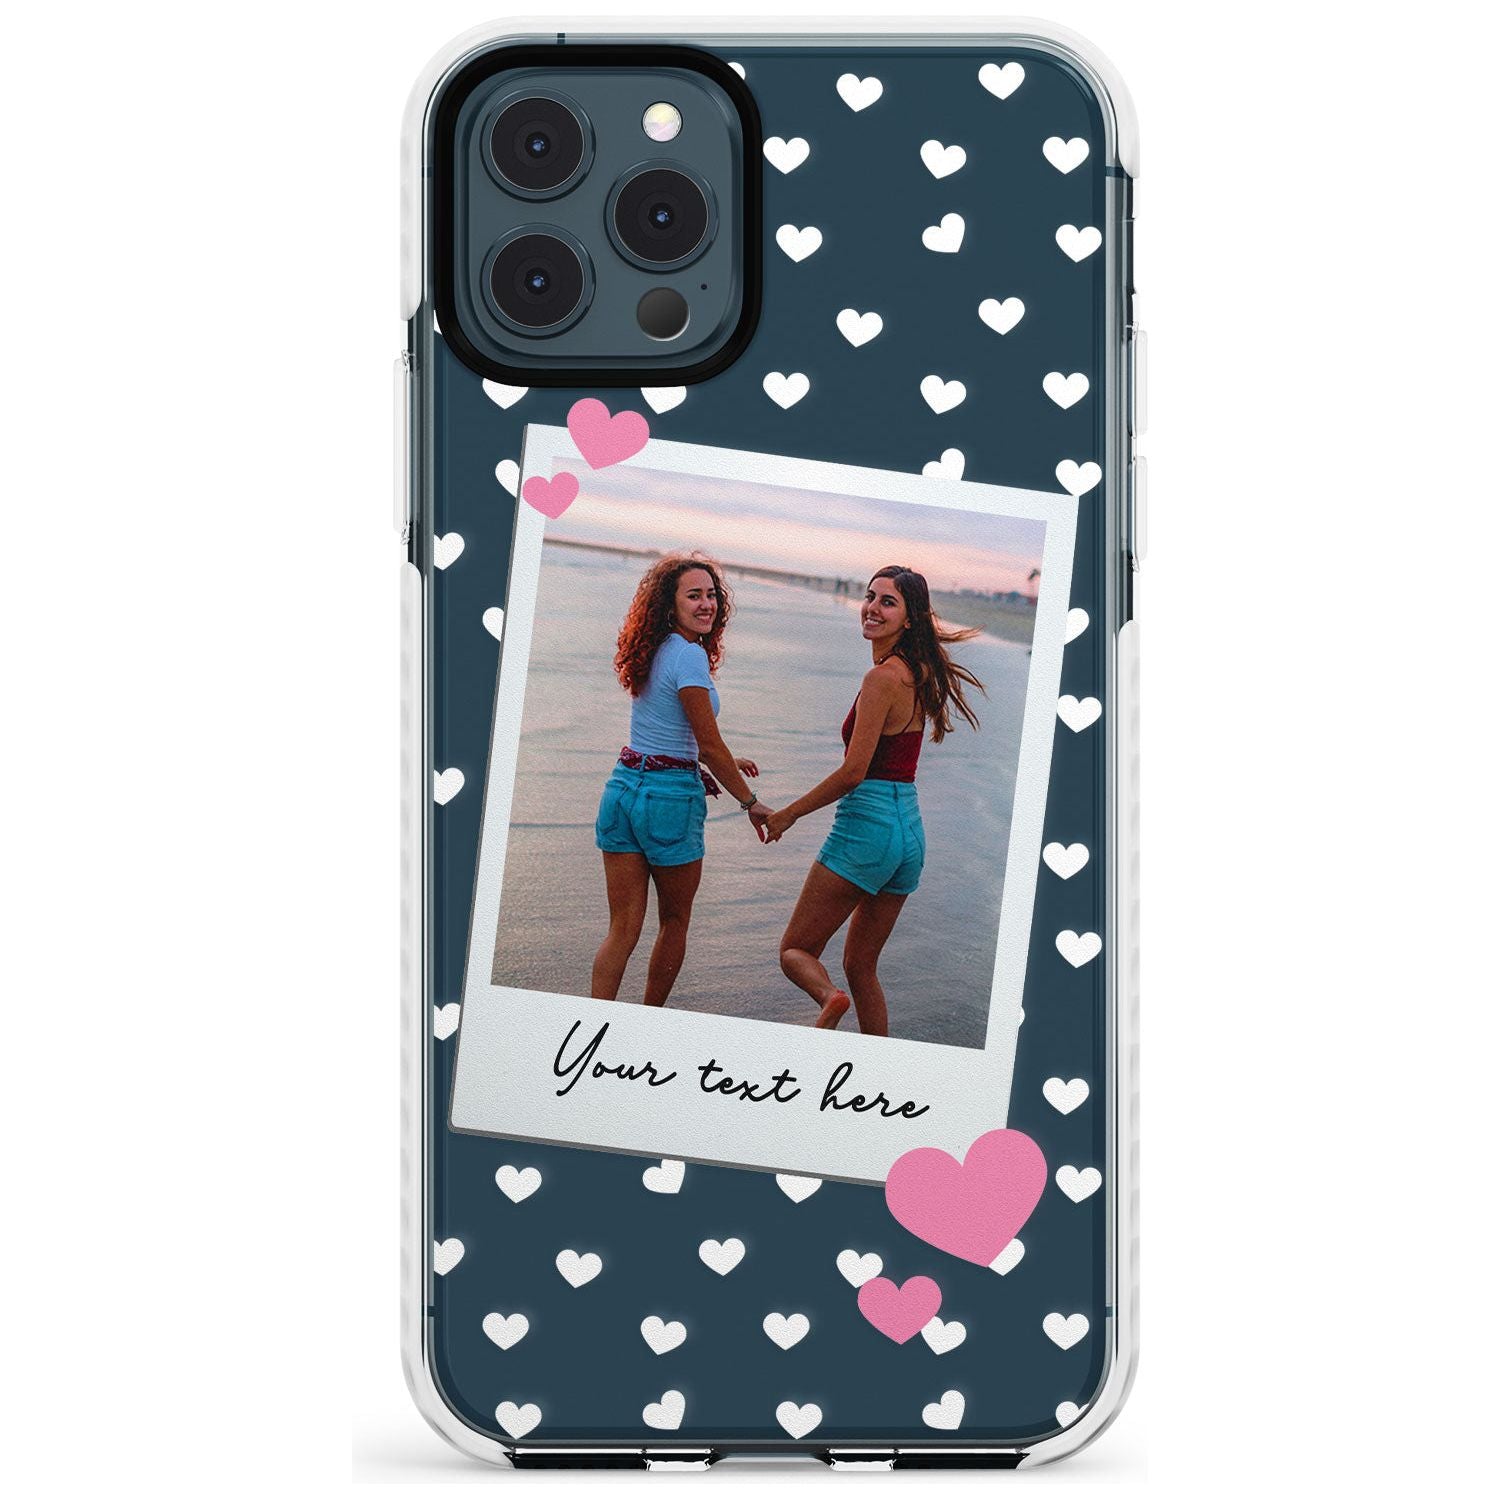 Instant Film & Hearts Slim TPU Phone Case for iPhone 11 Pro Max